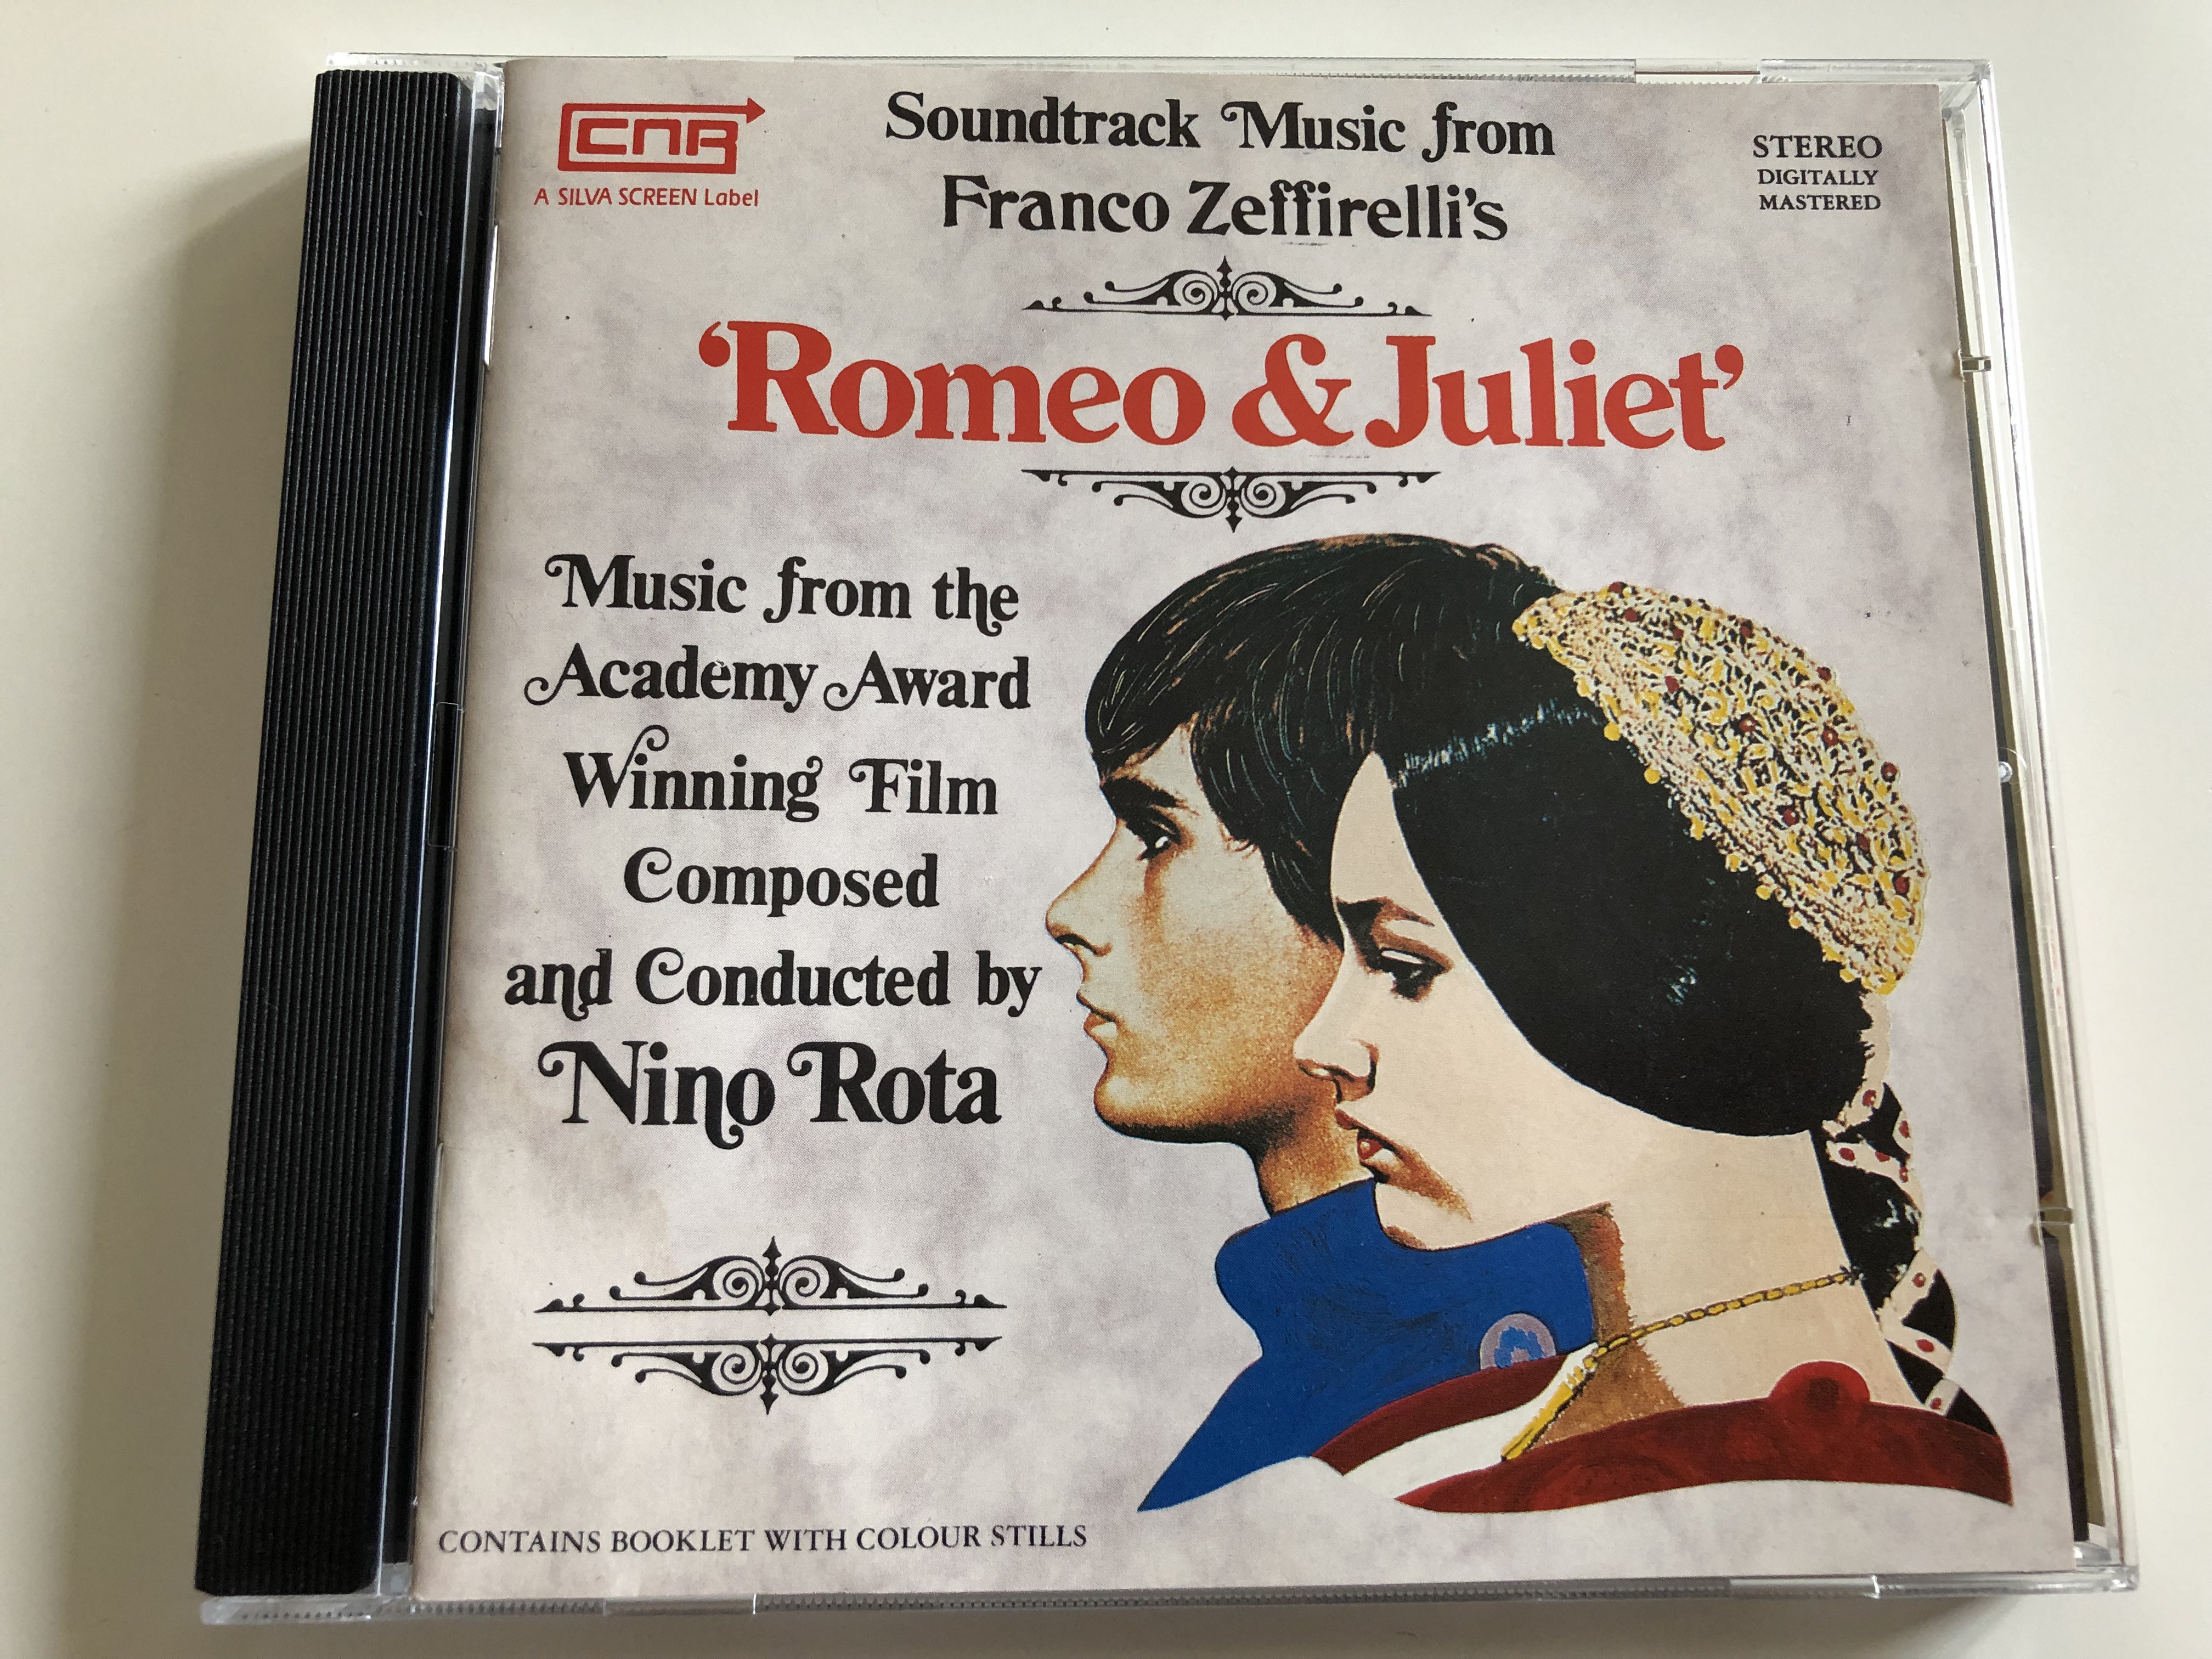 romeo-juliet-soundtrack-music-from-franco-zeffirelli-s-1968-film-audio-cd-1991-composed-and-conducted-by-nino-rota-cloud-nine-records-1-.jpg